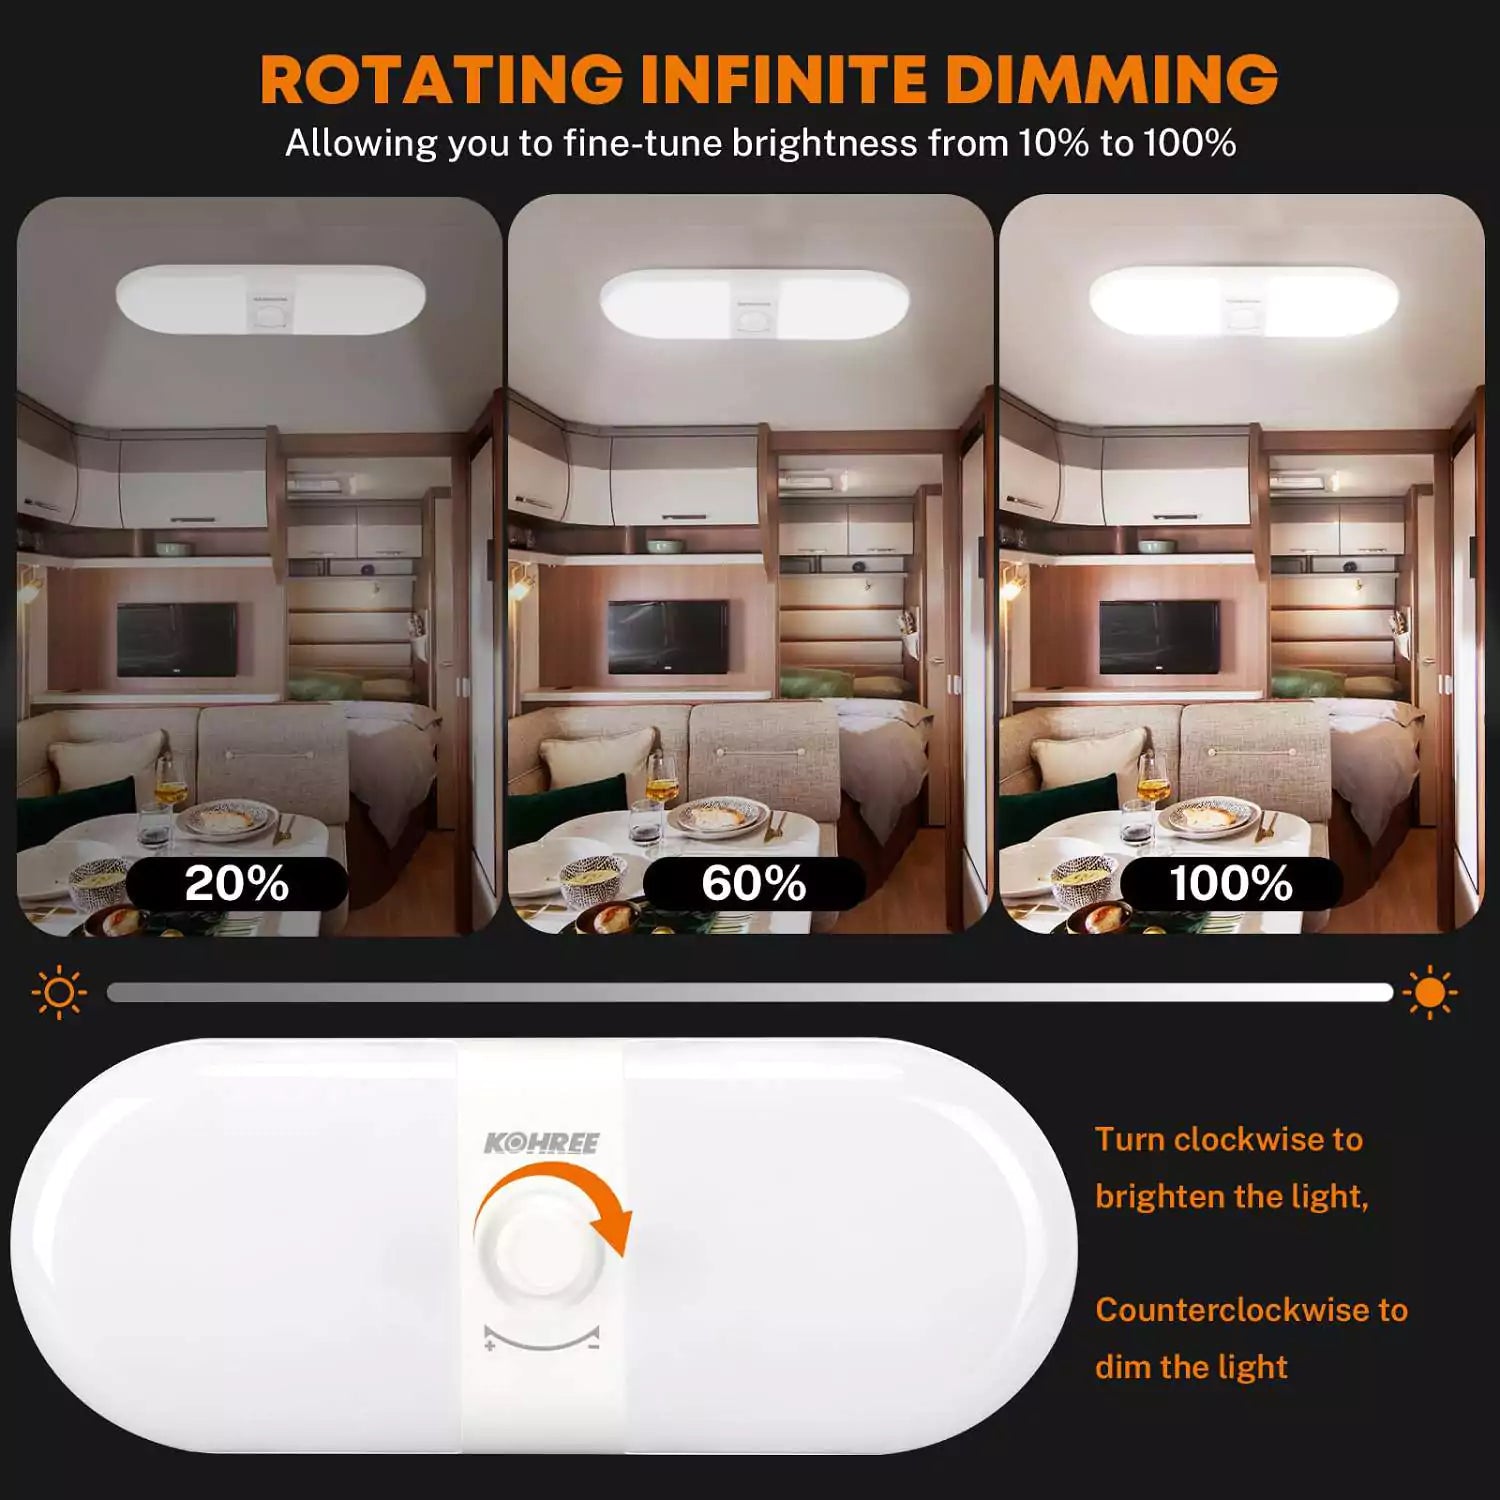 Rotating infinite dimming of 1800LM camper interior light